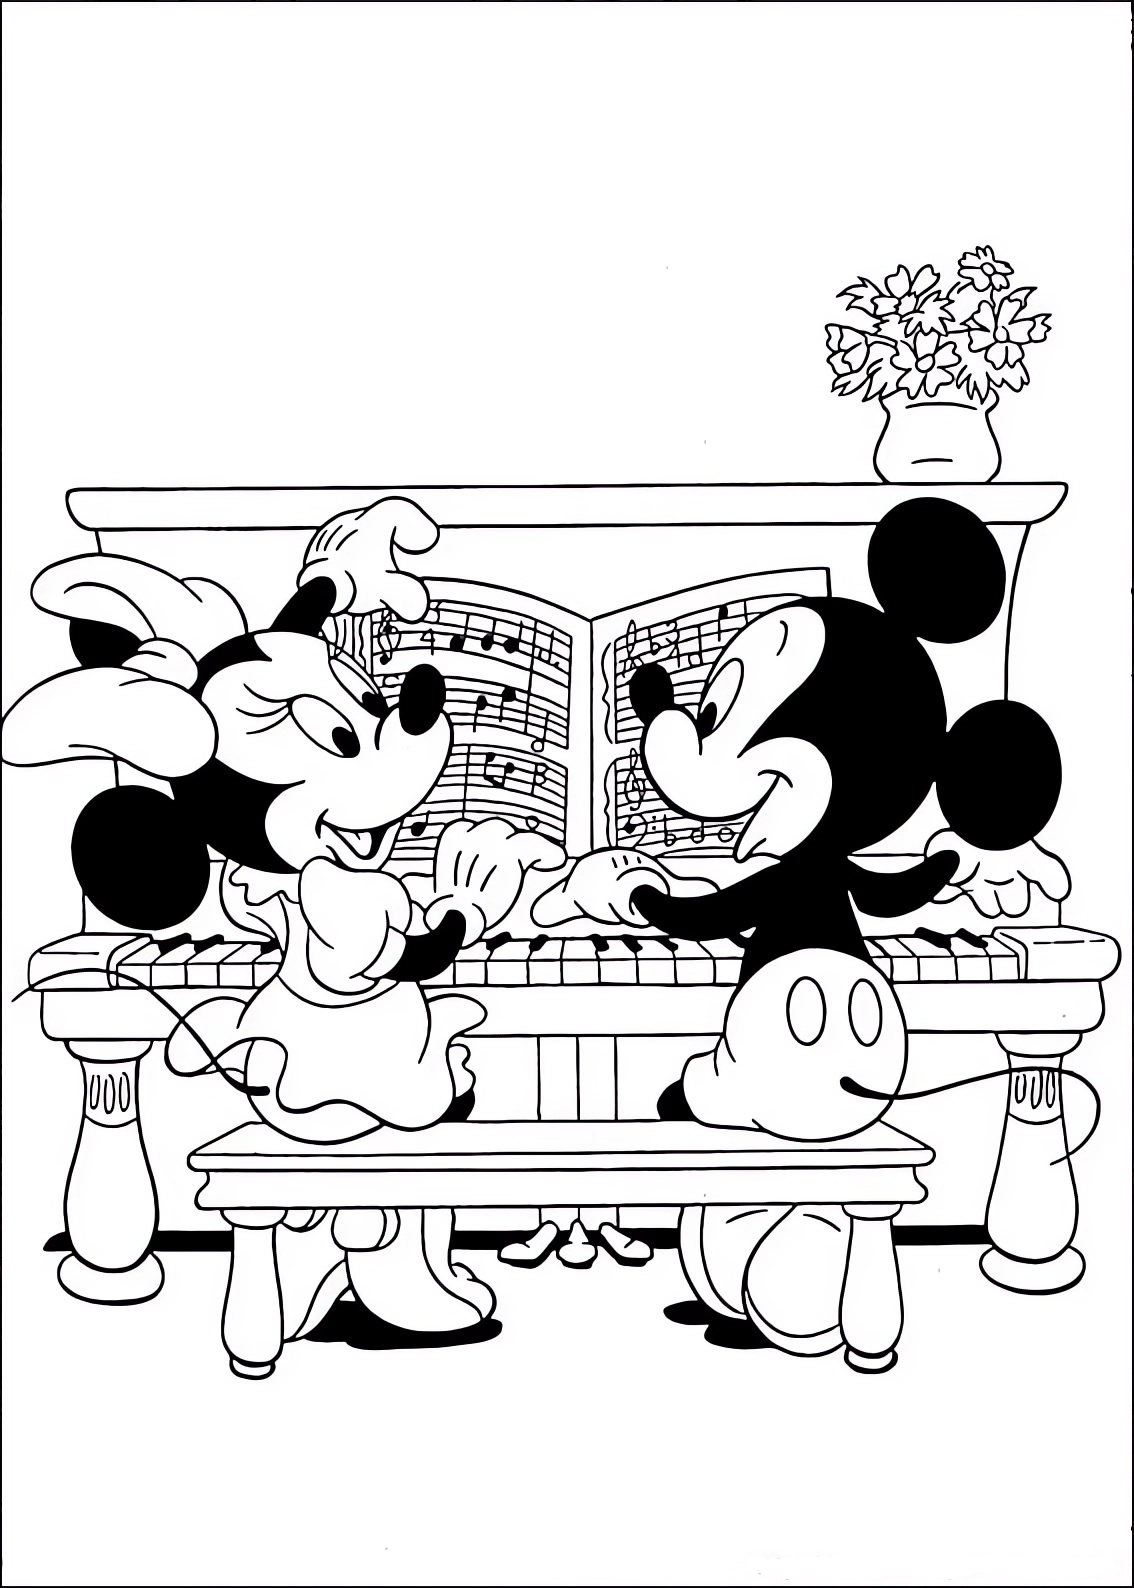 Coloring page of Minnie and Mickey Mouse playing the piano